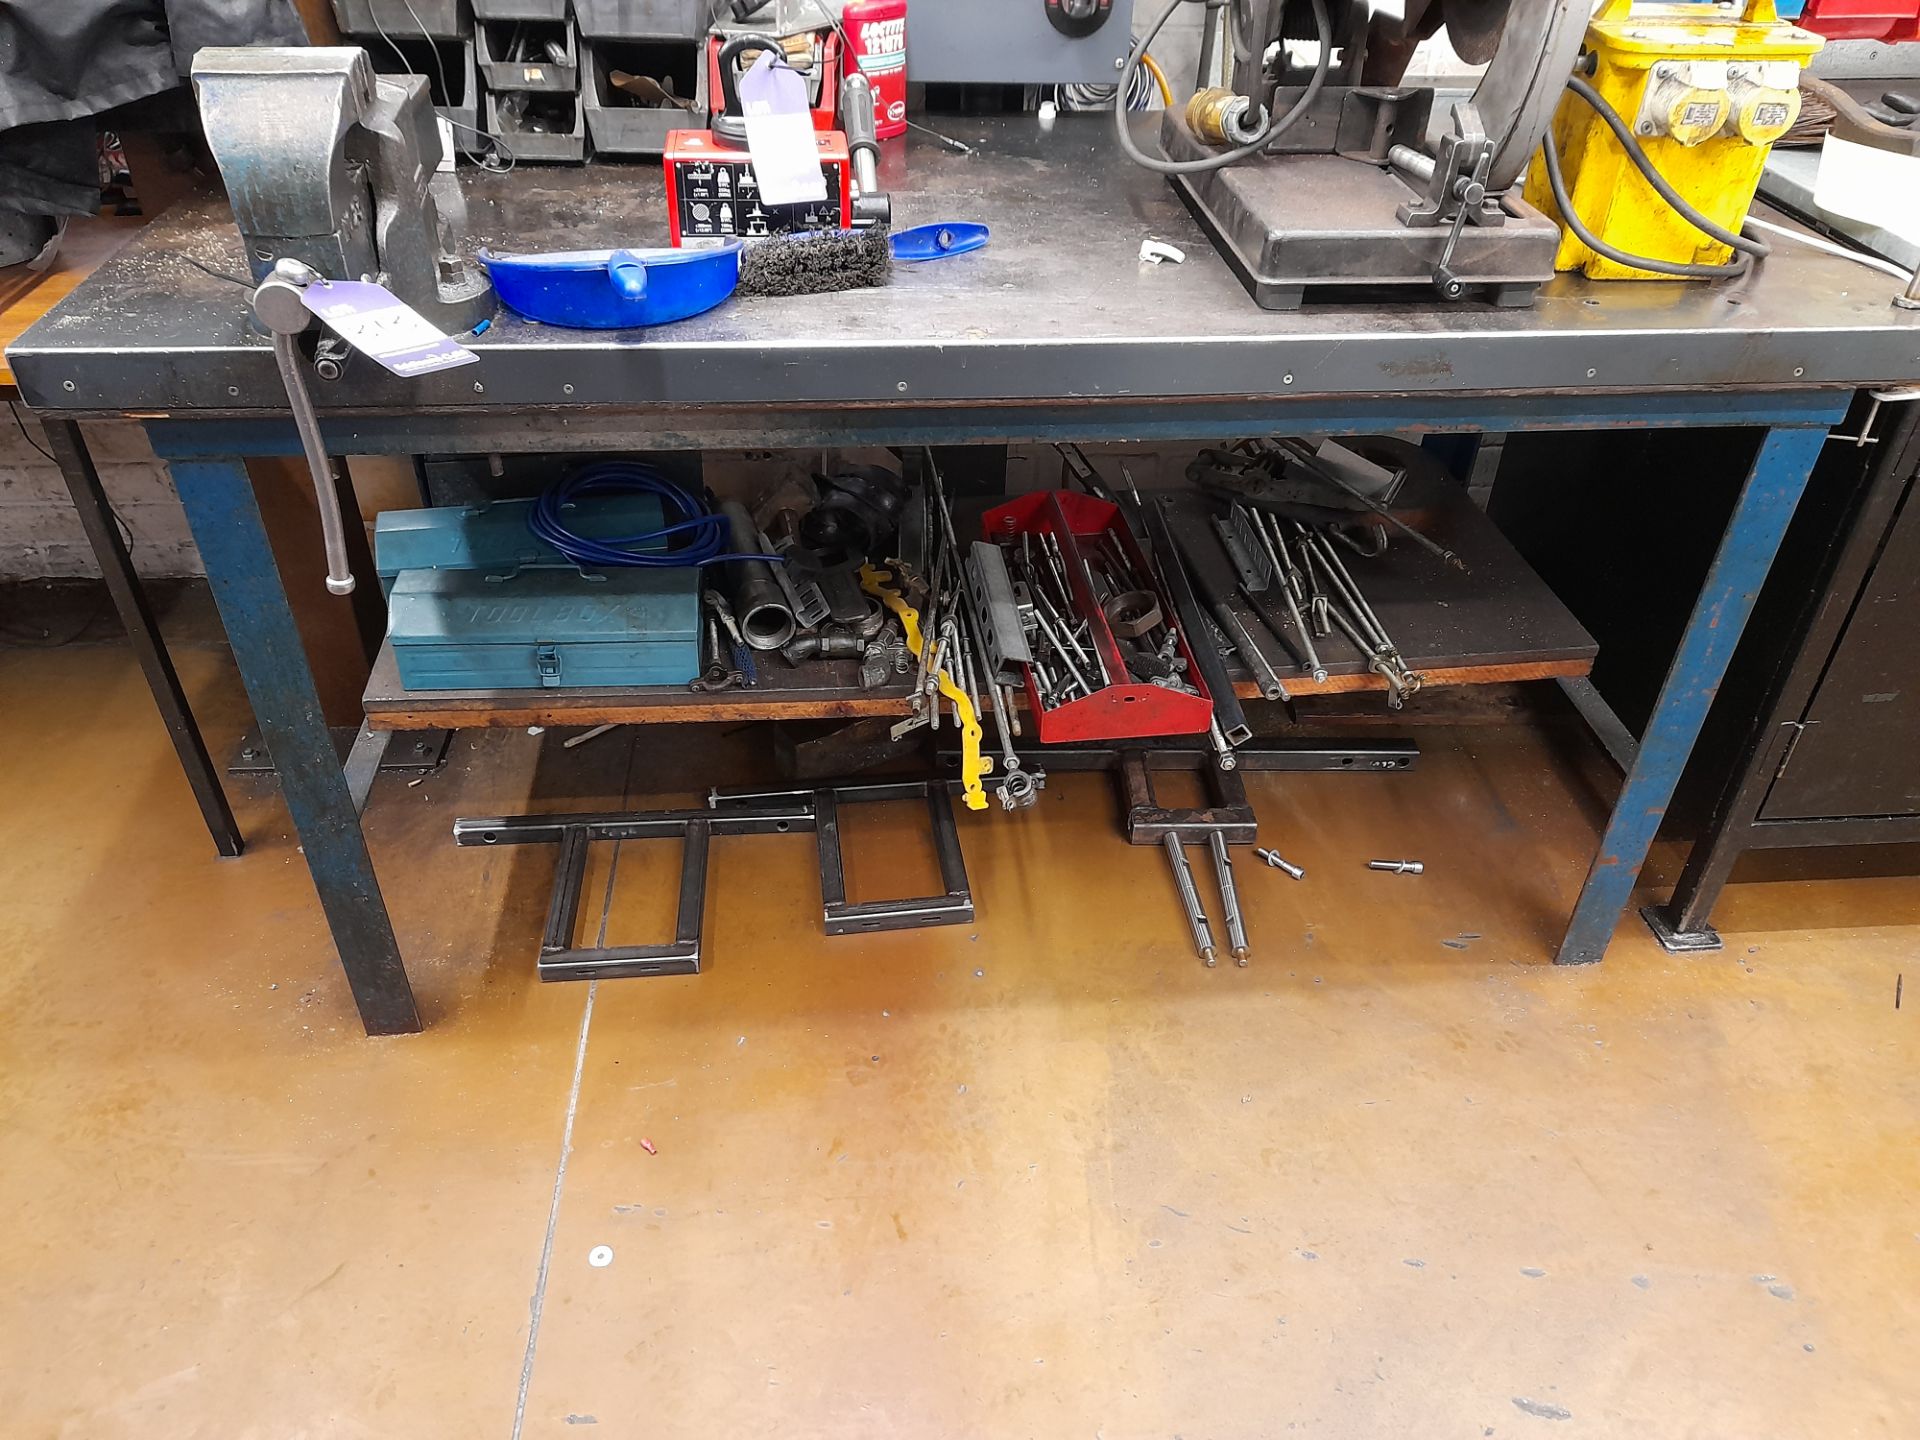 Steel fabricated engineers work bench (Approximately 1730 x 810), with Record No23 vice, and magnify